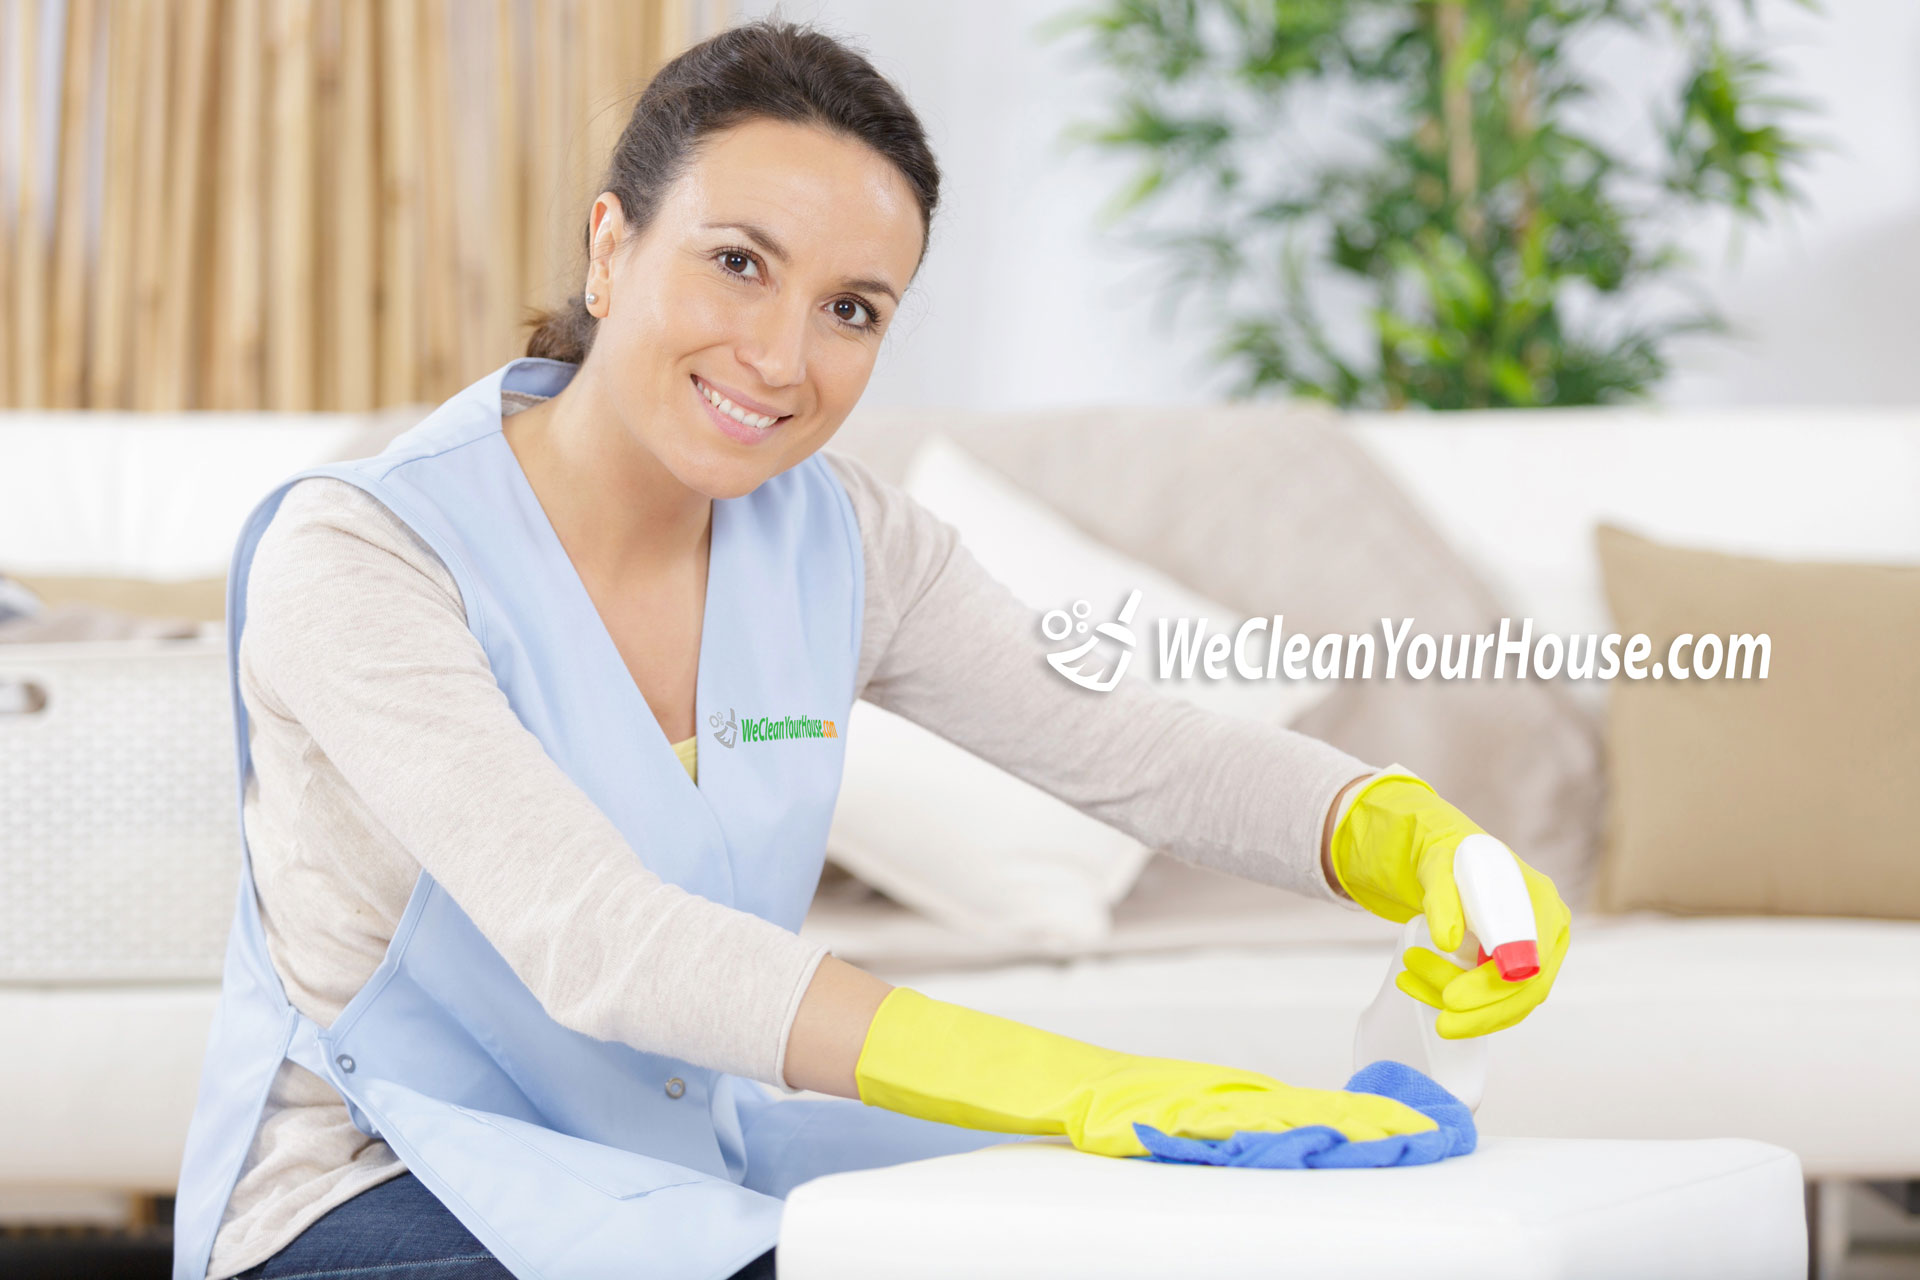 Professional house cleaners